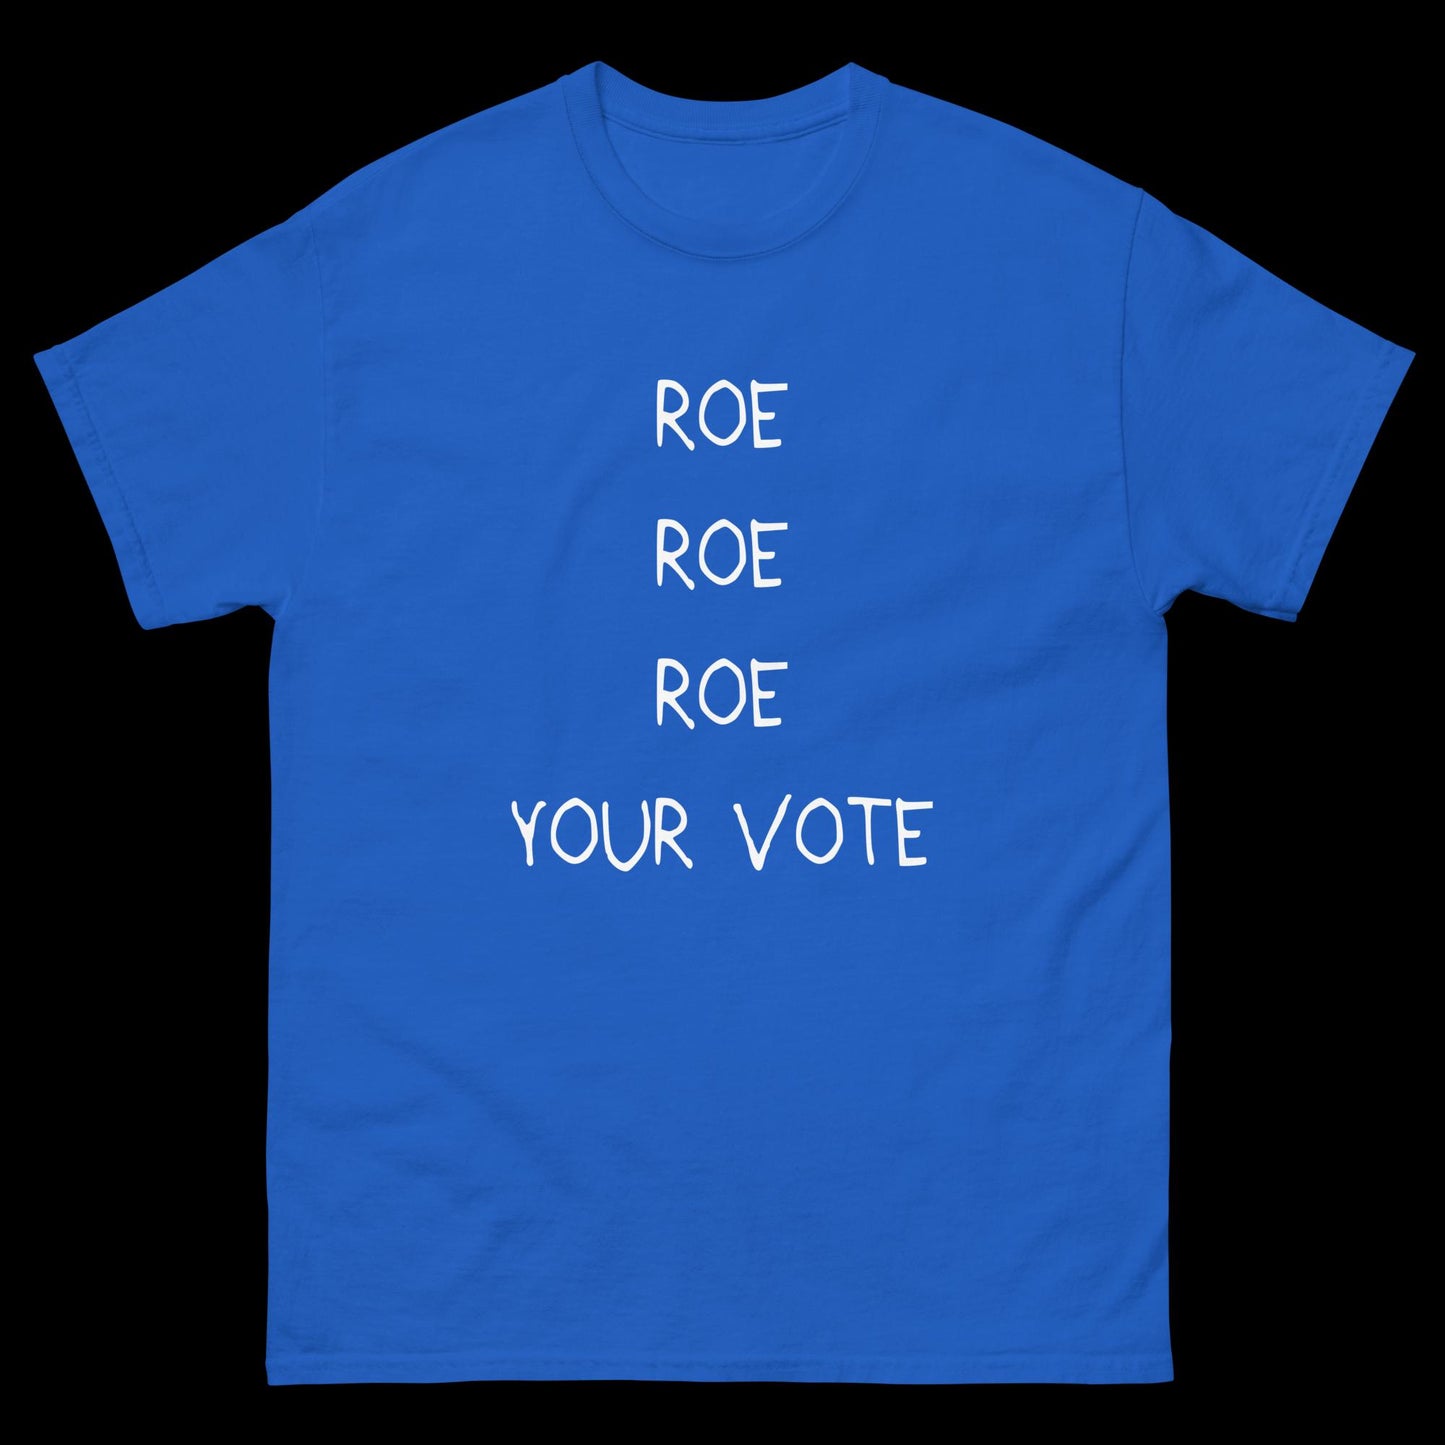 Roe Roe Roe Your Vote - Classic T-Shirt